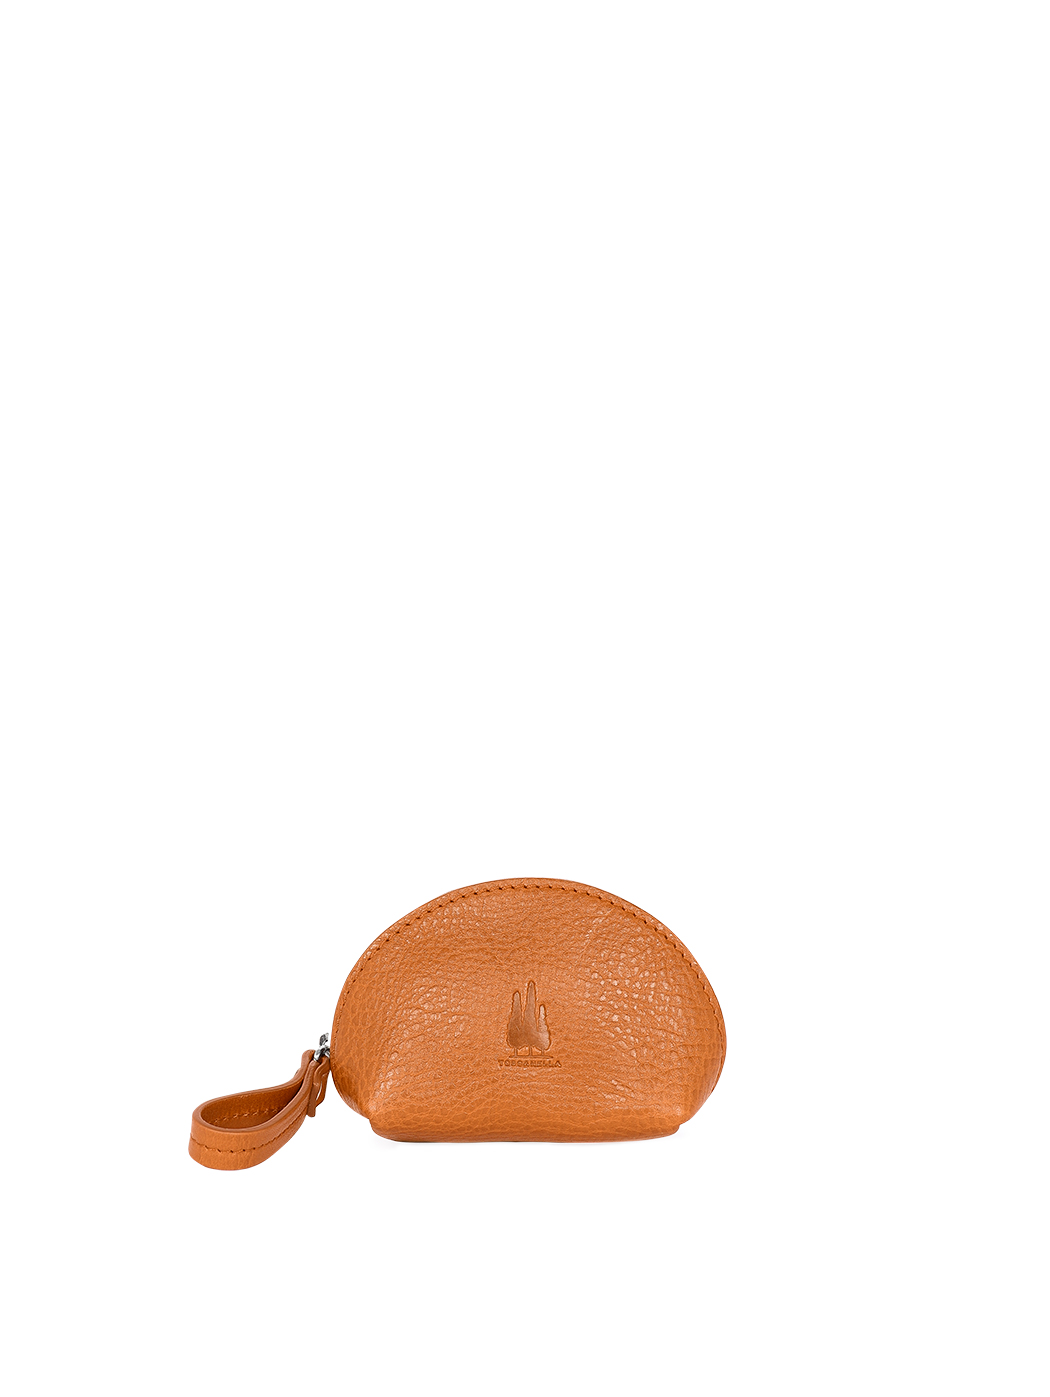 Women's Small Clam Shell Pouch in Leather Tobacco